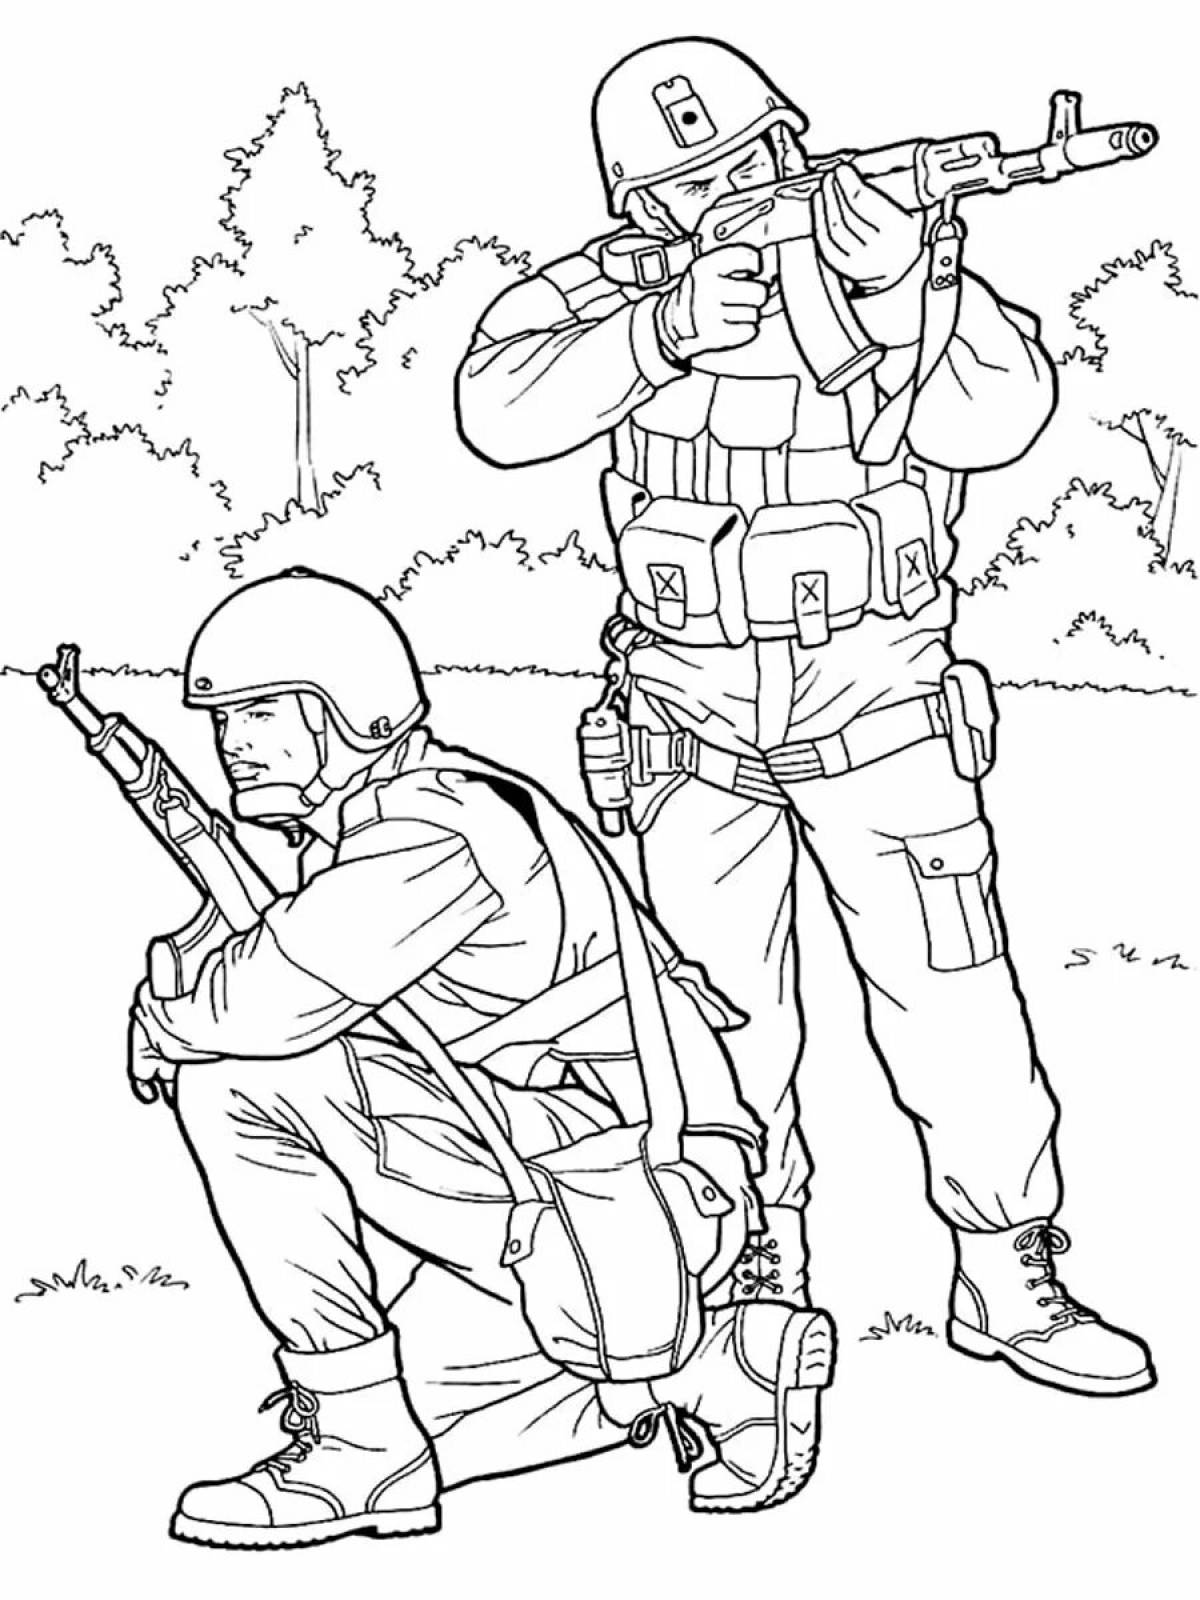 An extraordinary Russian soldier coloring pages for kids